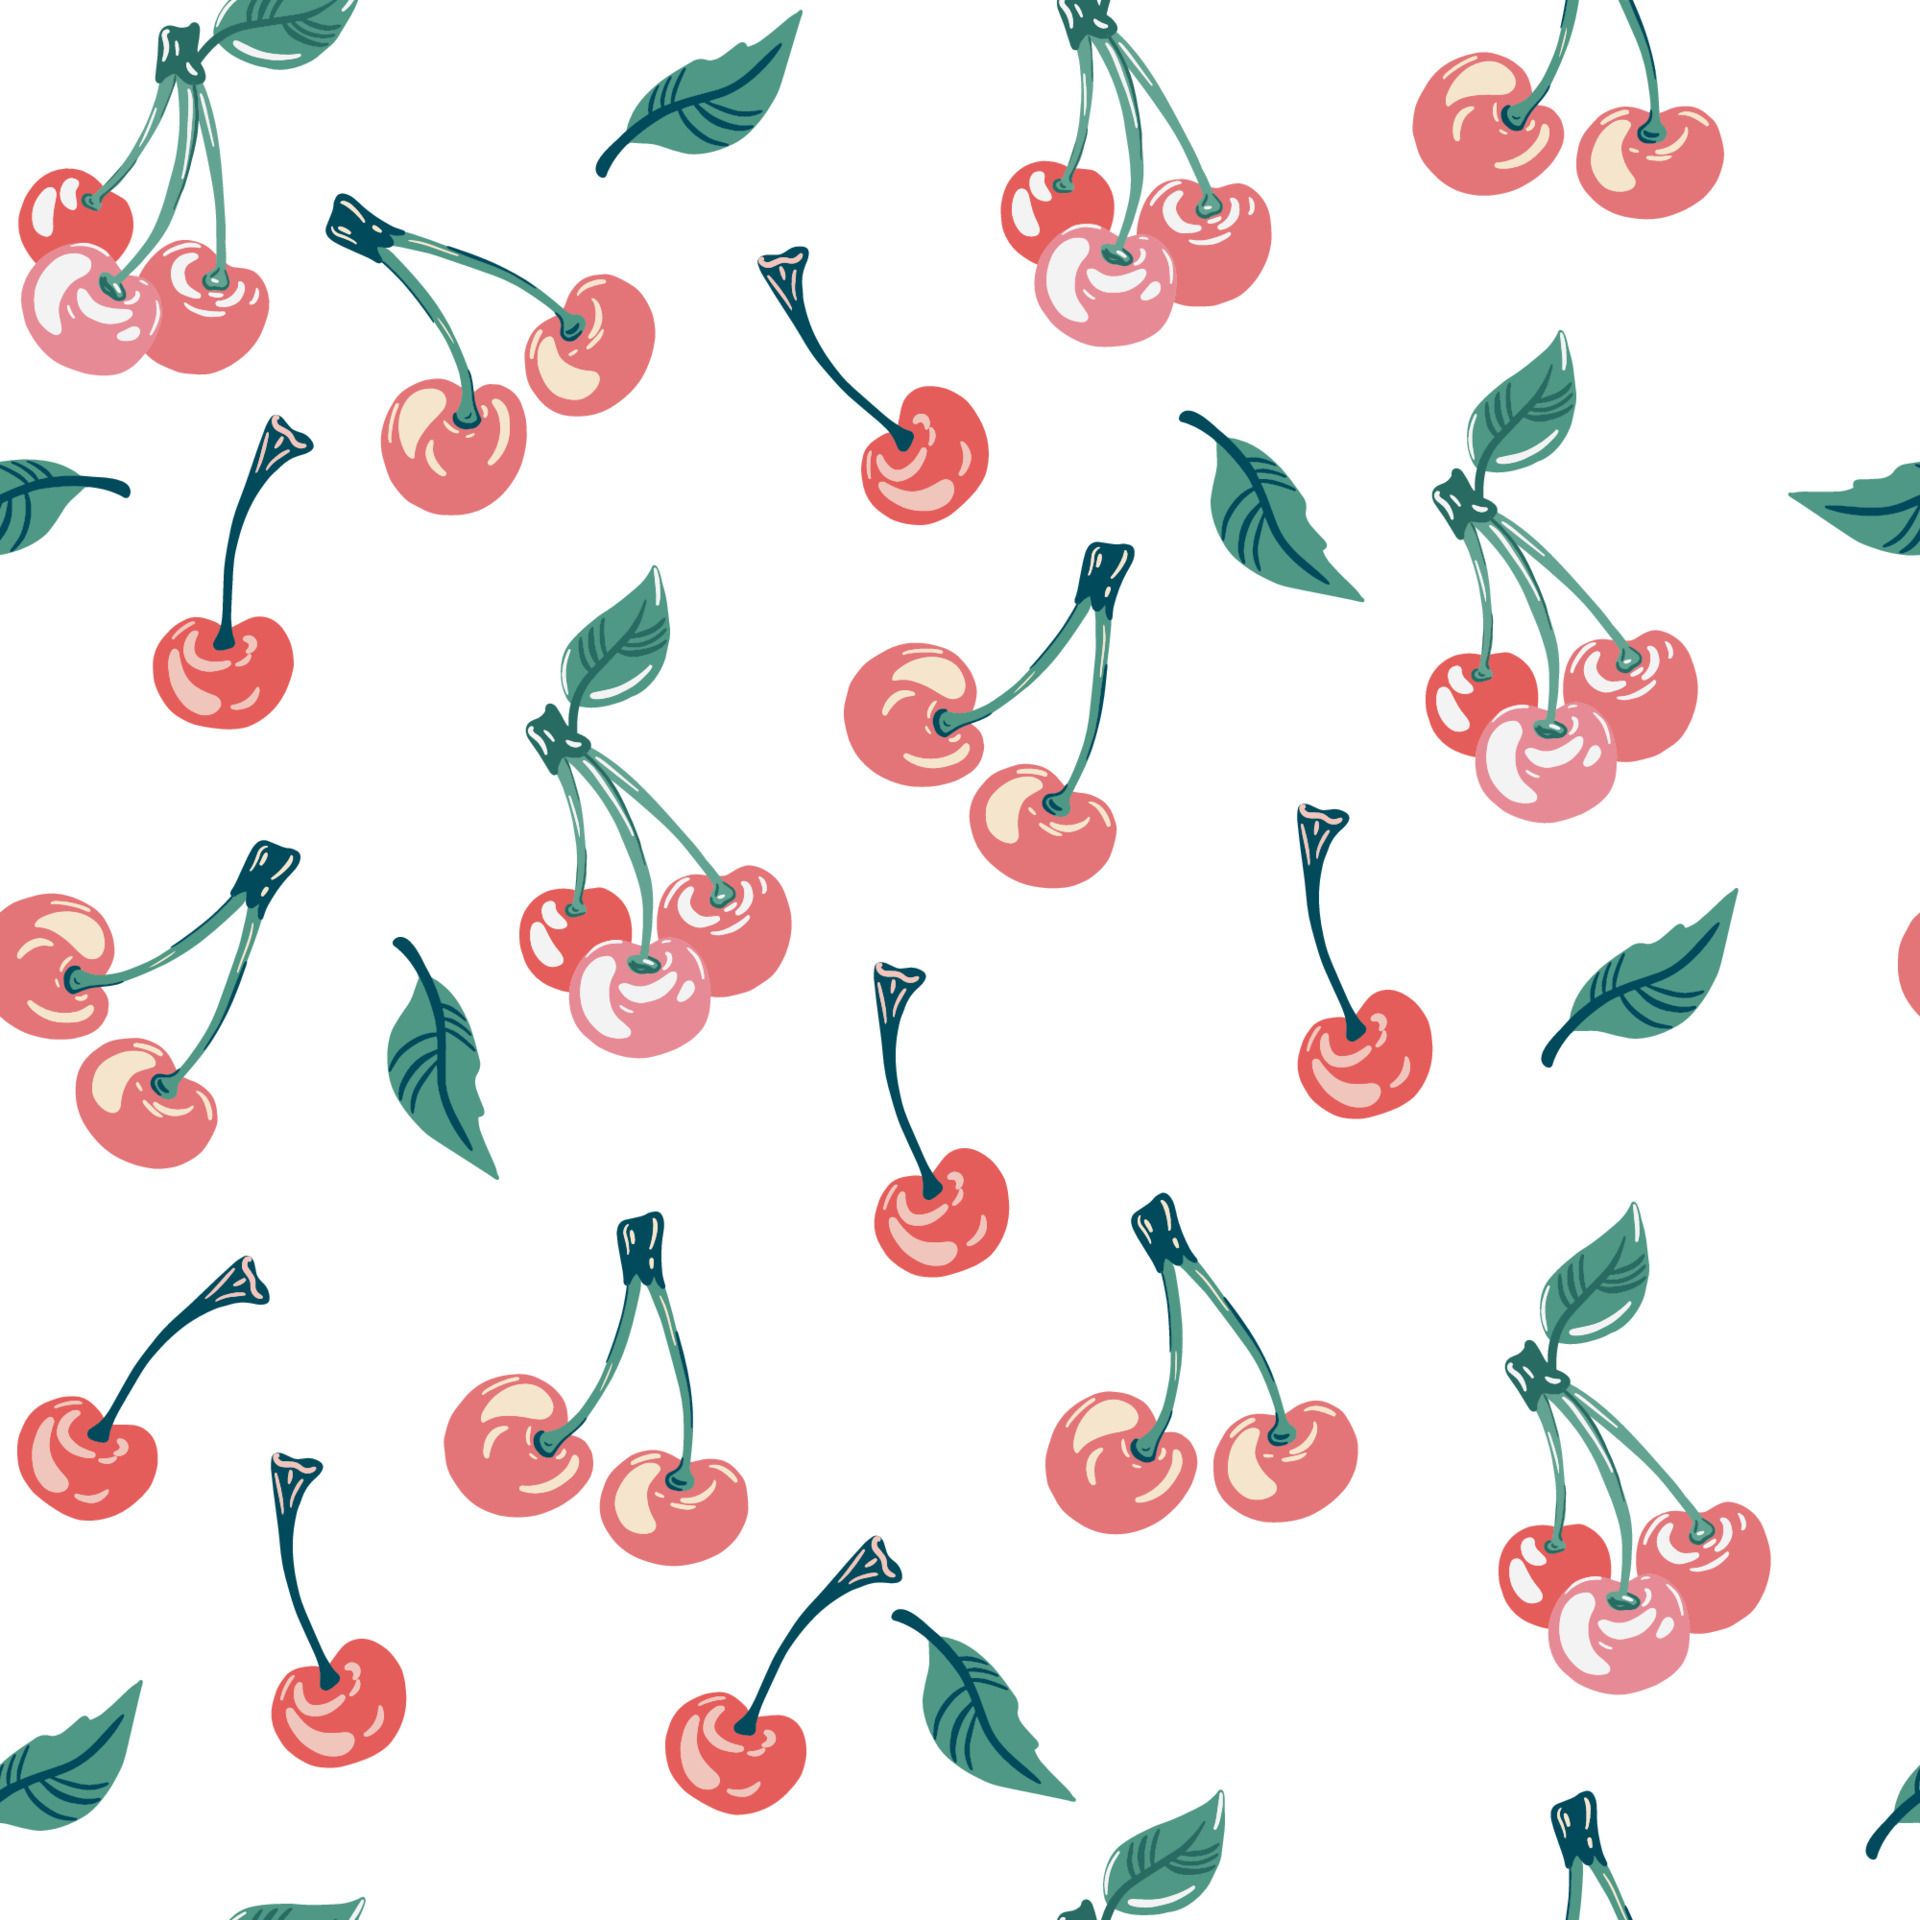 A pattern of red cherries with green stems and leaves on a white background - Cherry